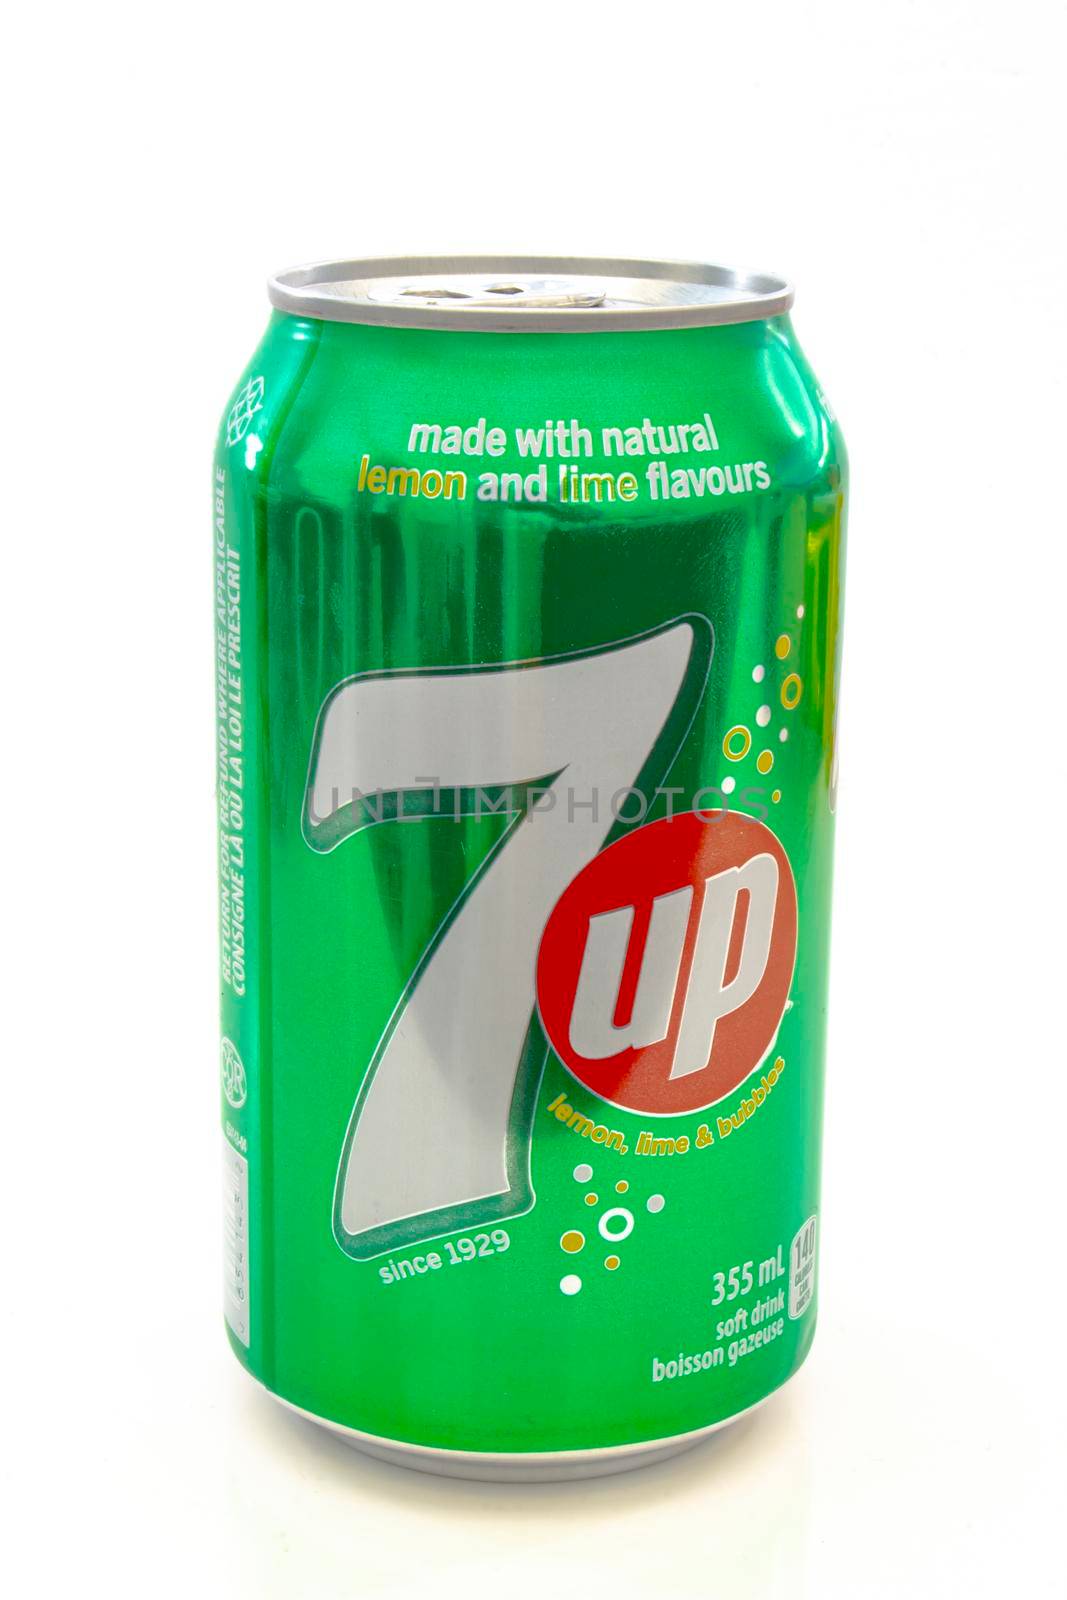 Calgary Alberta, Canada. May 1, 2021. A can of 7up an American brand of lemon-lime-flavored non-caffeinated soft drink. by oasisamuel